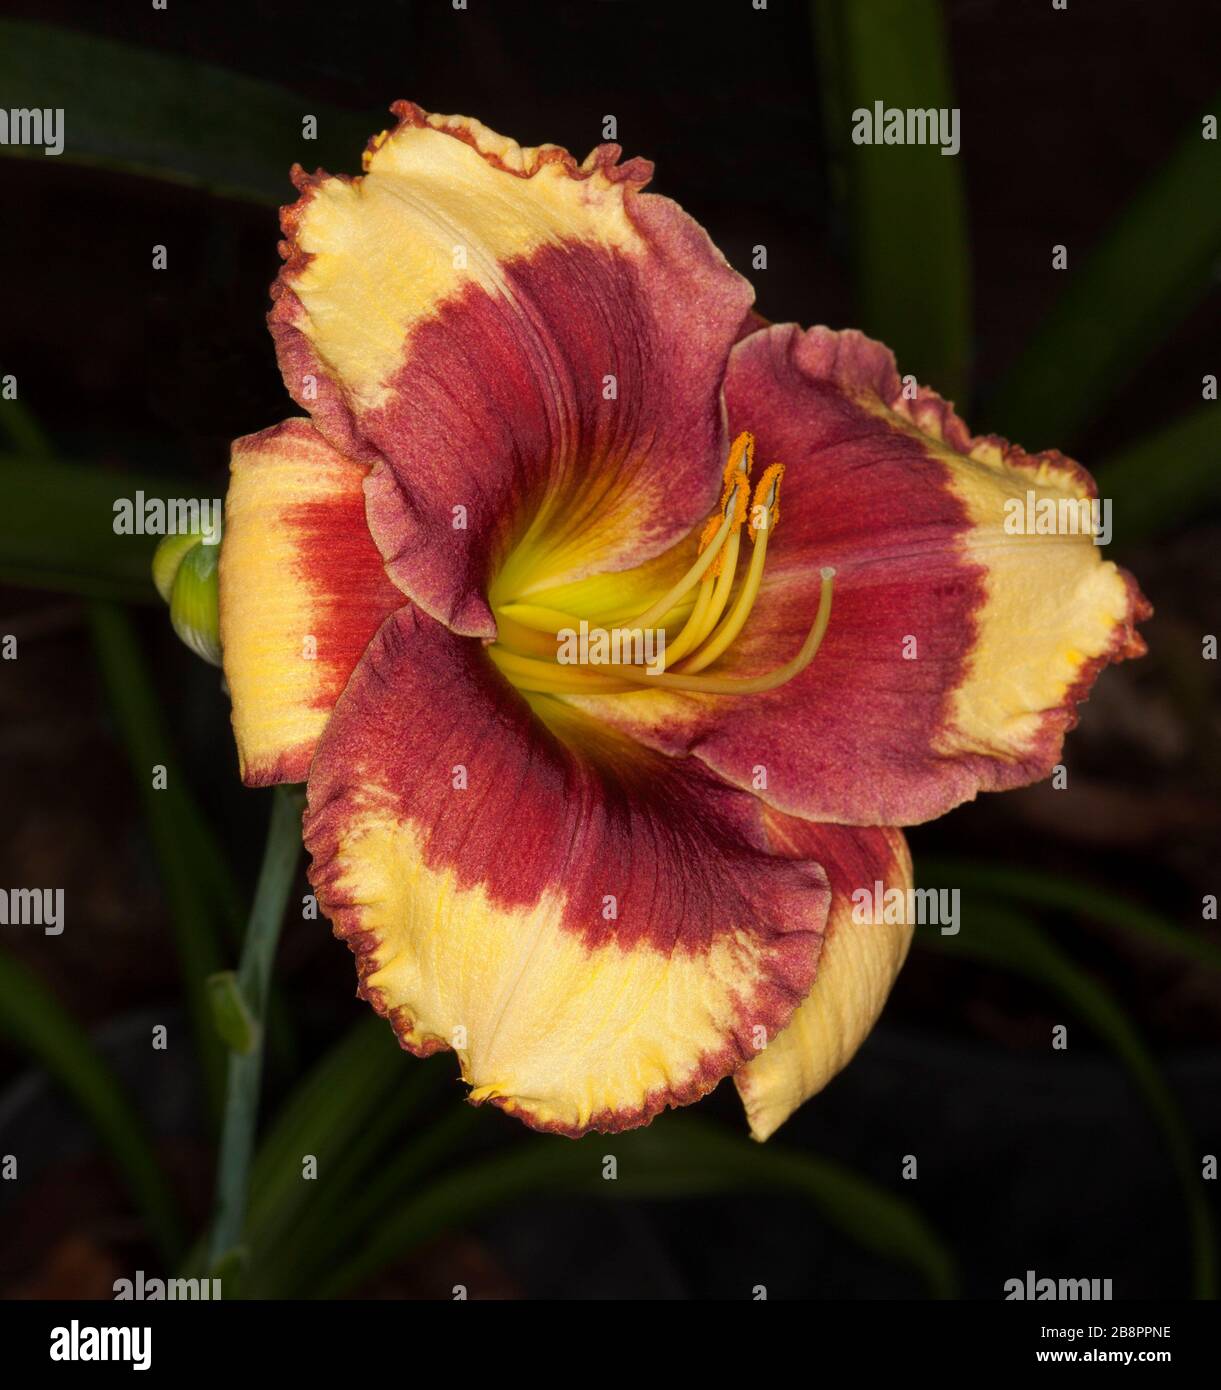 Stunning red and yellow flower of daylily, Hemerocallis 'Candid Colours', on background of dark green foliage Stock Photo